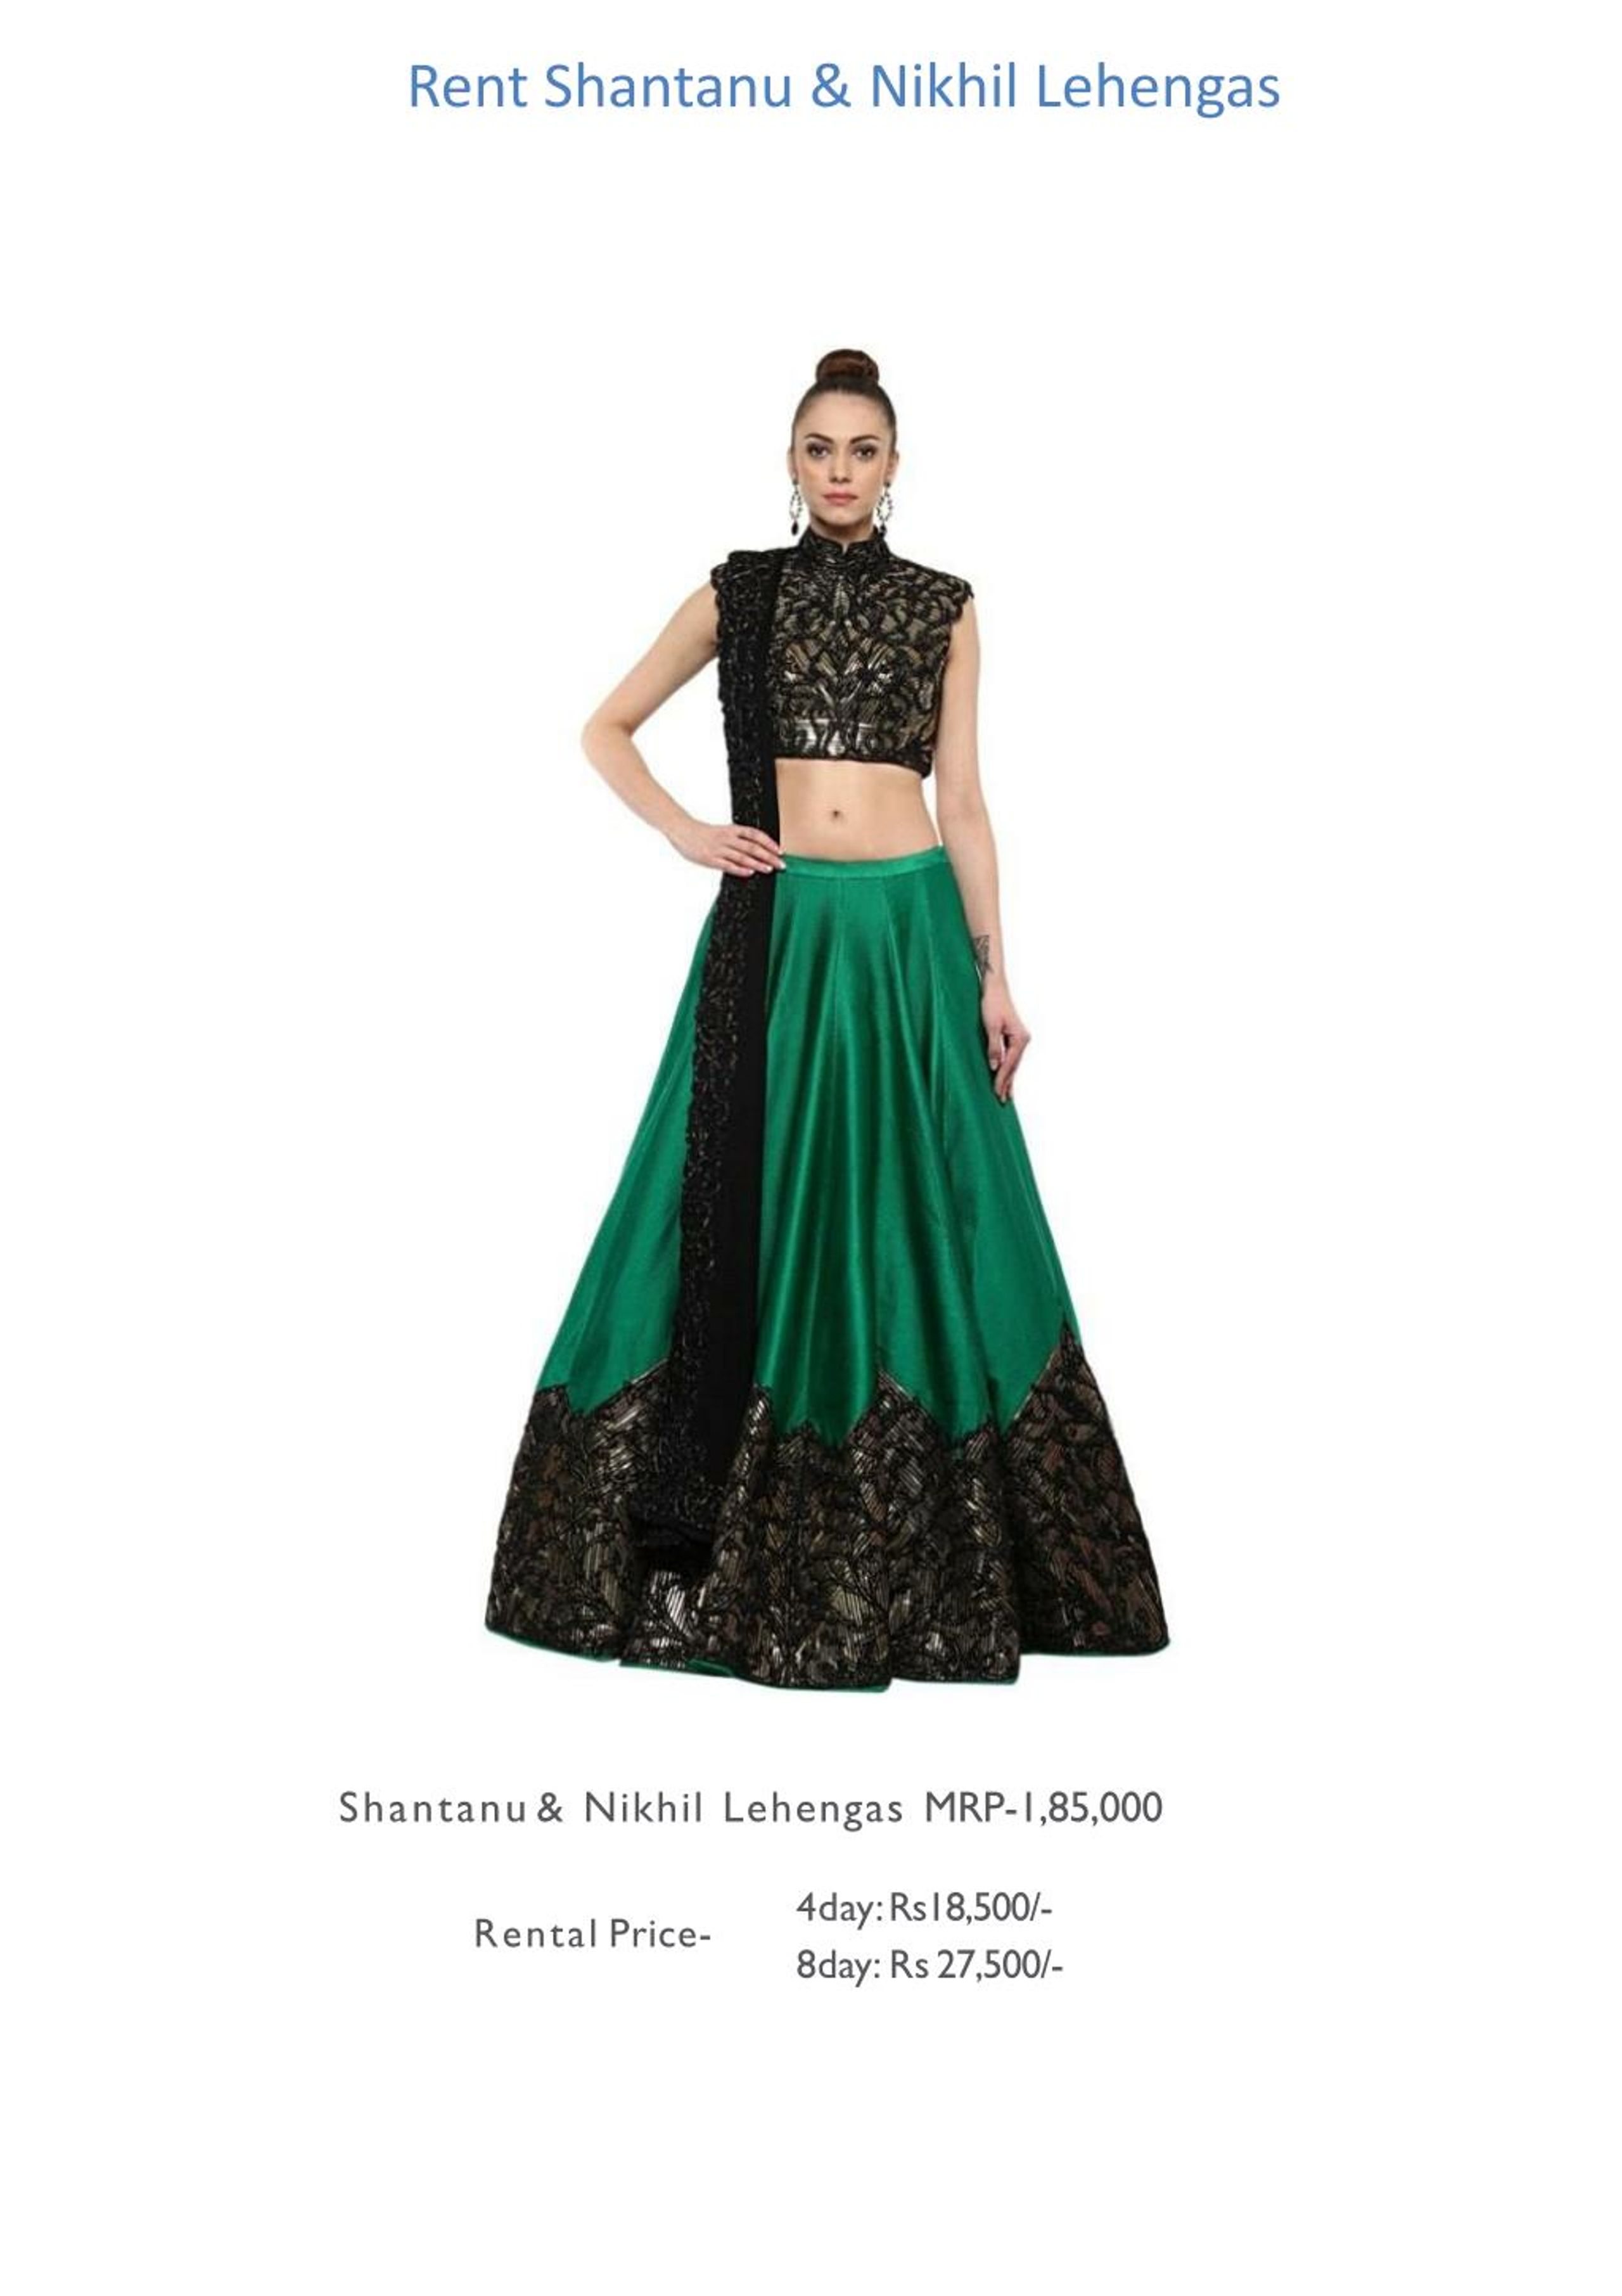 Where Can You Rent A Lehenga Online - Wish N Wed